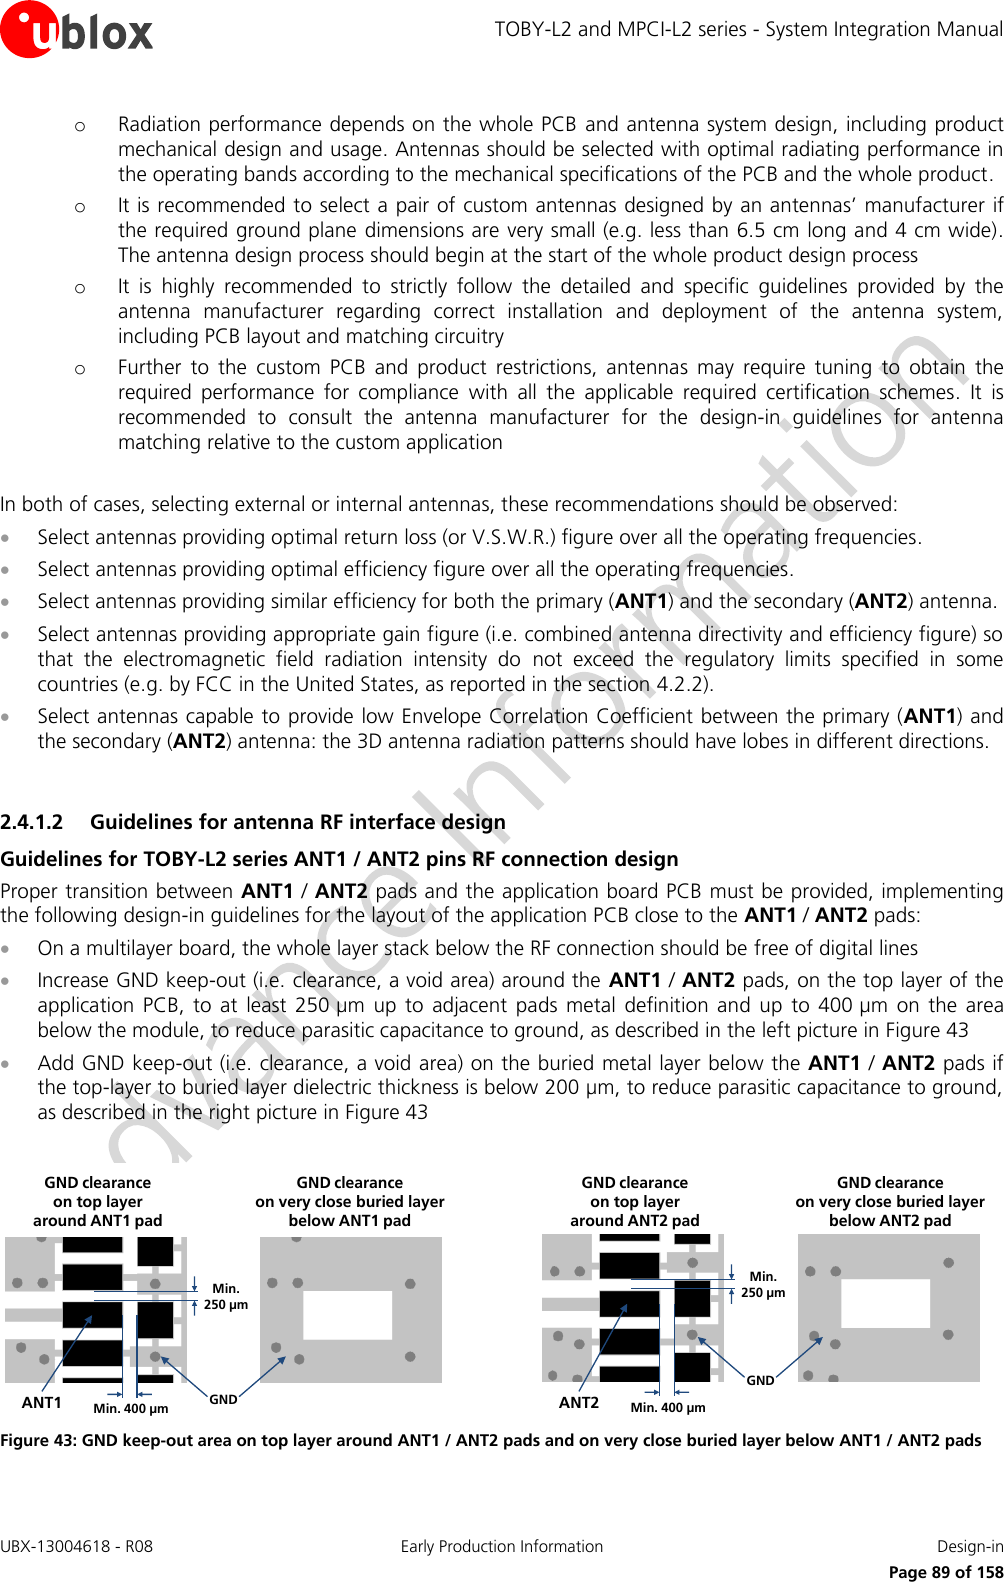 TOBY-L2 and MPCI-L2 series - System Integration Manual UBX-13004618 - R08  Early Production Information  Design-in     Page 89 of 158 o Radiation performance depends on the whole PCB  and antenna system design, including product mechanical design and usage. Antennas should be selected with optimal radiating performance in the operating bands according to the mechanical specifications of the PCB and the whole product. o It is recommended to select a pair of custom antennas designed by an antennas’ manufacturer if the required ground plane dimensions are very small (e.g. less than 6.5 cm long and 4 cm wide). The antenna design process should begin at the start of the whole product design process o It  is  highly  recommended  to  strictly  follow  the  detailed  and  specific  guidelines  provided  by  the antenna  manufacturer  regarding  correct  installation  and  deployment  of  the  antenna  system, including PCB layout and matching circuitry o Further  to  the  custom  PCB  and  product  restrictions,  antennas  may  require  tuning  to  obtain  the required  performance  for  compliance  with  all  the  applicable  required  certification  schemes.  It  is recommended  to  consult  the  antenna  manufacturer  for  the  design-in  guidelines  for  antenna matching relative to the custom application  In both of cases, selecting external or internal antennas, these recommendations should be observed:  Select antennas providing optimal return loss (or V.S.W.R.) figure over all the operating frequencies.  Select antennas providing optimal efficiency figure over all the operating frequencies.  Select antennas providing similar efficiency for both the primary (ANT1) and the secondary (ANT2) antenna.  Select antennas providing appropriate gain figure (i.e. combined antenna directivity and efficiency figure) so that  the  electromagnetic  field  radiation  intensity  do  not  exceed  the  regulatory  limits  specified  in  some countries (e.g. by FCC in the United States, as reported in the section 4.2.2).  Select antennas capable to provide low Envelope Correlation Coefficient between the primary (ANT1) and the secondary (ANT2) antenna: the 3D antenna radiation patterns should have lobes in different directions.  2.4.1.2 Guidelines for antenna RF interface design Guidelines for TOBY-L2 series ANT1 / ANT2 pins RF connection design Proper transition between ANT1 / ANT2 pads and the application board PCB must be provided, implementing the following design-in guidelines for the layout of the application PCB close to the ANT1 / ANT2 pads:  On a multilayer board, the whole layer stack below the RF connection should be free of digital lines  Increase GND keep-out (i.e. clearance, a void area) around the  ANT1 / ANT2 pads, on the top layer of the application  PCB,  to  at  least  250 µm  up  to  adjacent  pads  metal  definition  and  up  to  400 µm  on  the  area below the module, to reduce parasitic capacitance to ground, as described in the left picture in Figure 43  Add GND keep-out (i.e. clearance, a void area) on the buried metal layer below the ANT1 / ANT2 pads if the top-layer to buried layer dielectric thickness is below 200 µm, to reduce parasitic capacitance to ground, as described in the right picture in Figure 43  Min. 250 µmMin. 400 µm GNDANT1GND clearance on very close buried layerbelow ANT1 padGND clearance on top layer around ANT1 padMin. 250 µmMin. 400 µmGNDANT2GND clearance on very close buried layerbelow ANT2 padGND clearance on top layer around ANT2 pad Figure 43: GND keep-out area on top layer around ANT1 / ANT2 pads and on very close buried layer below ANT1 / ANT2 pads  